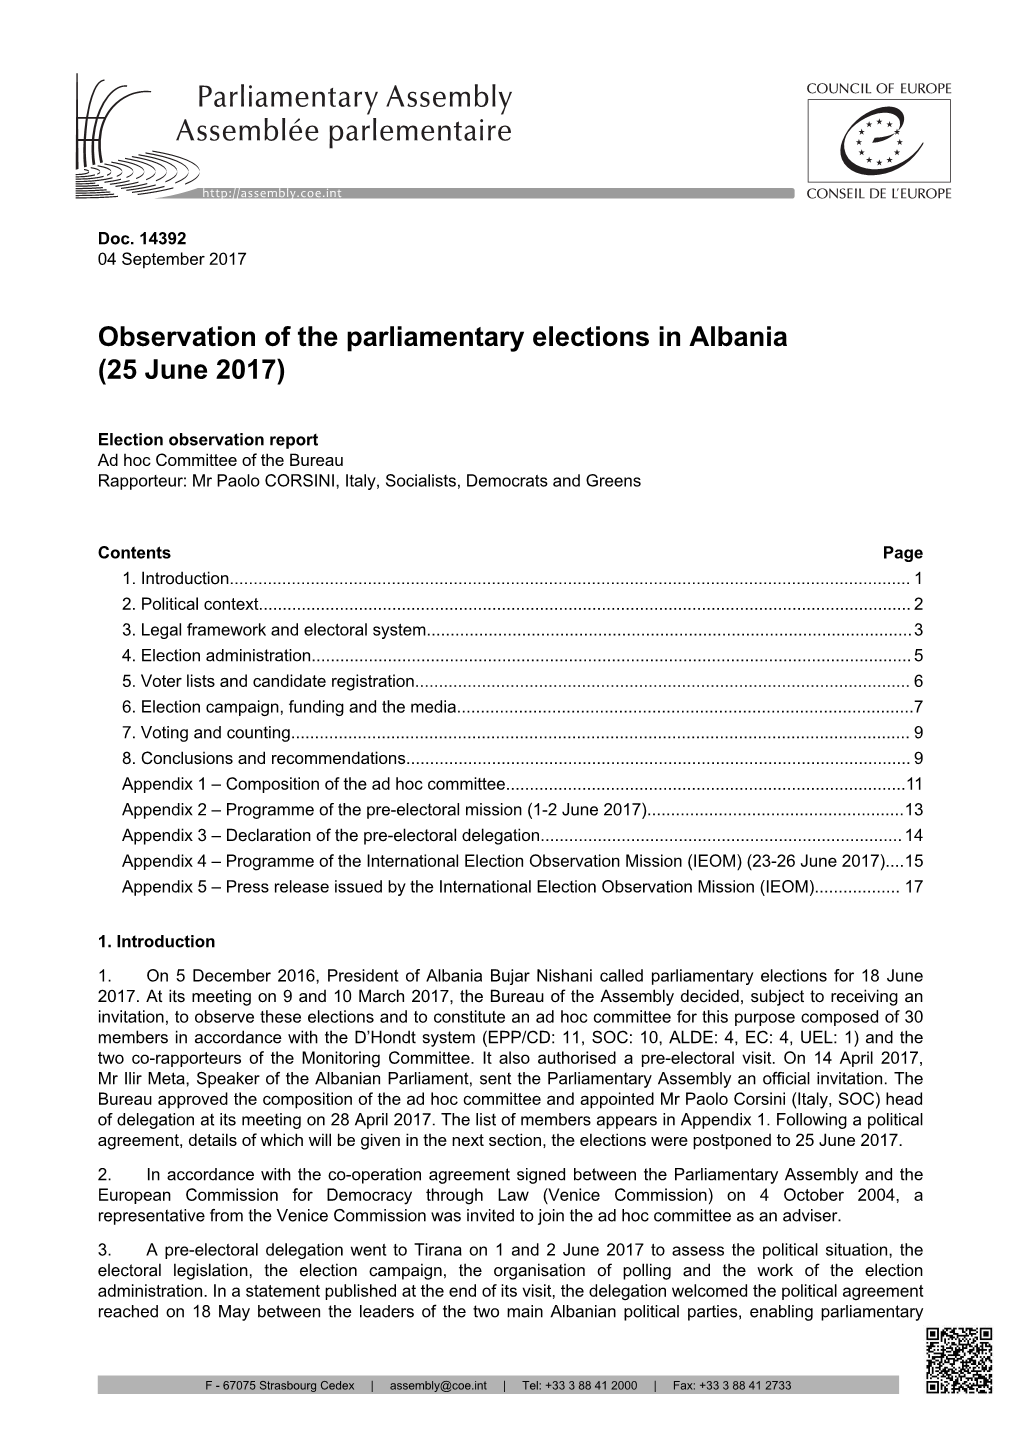 Observation of the Parliamentary Elections in Albania (25 June 2017)